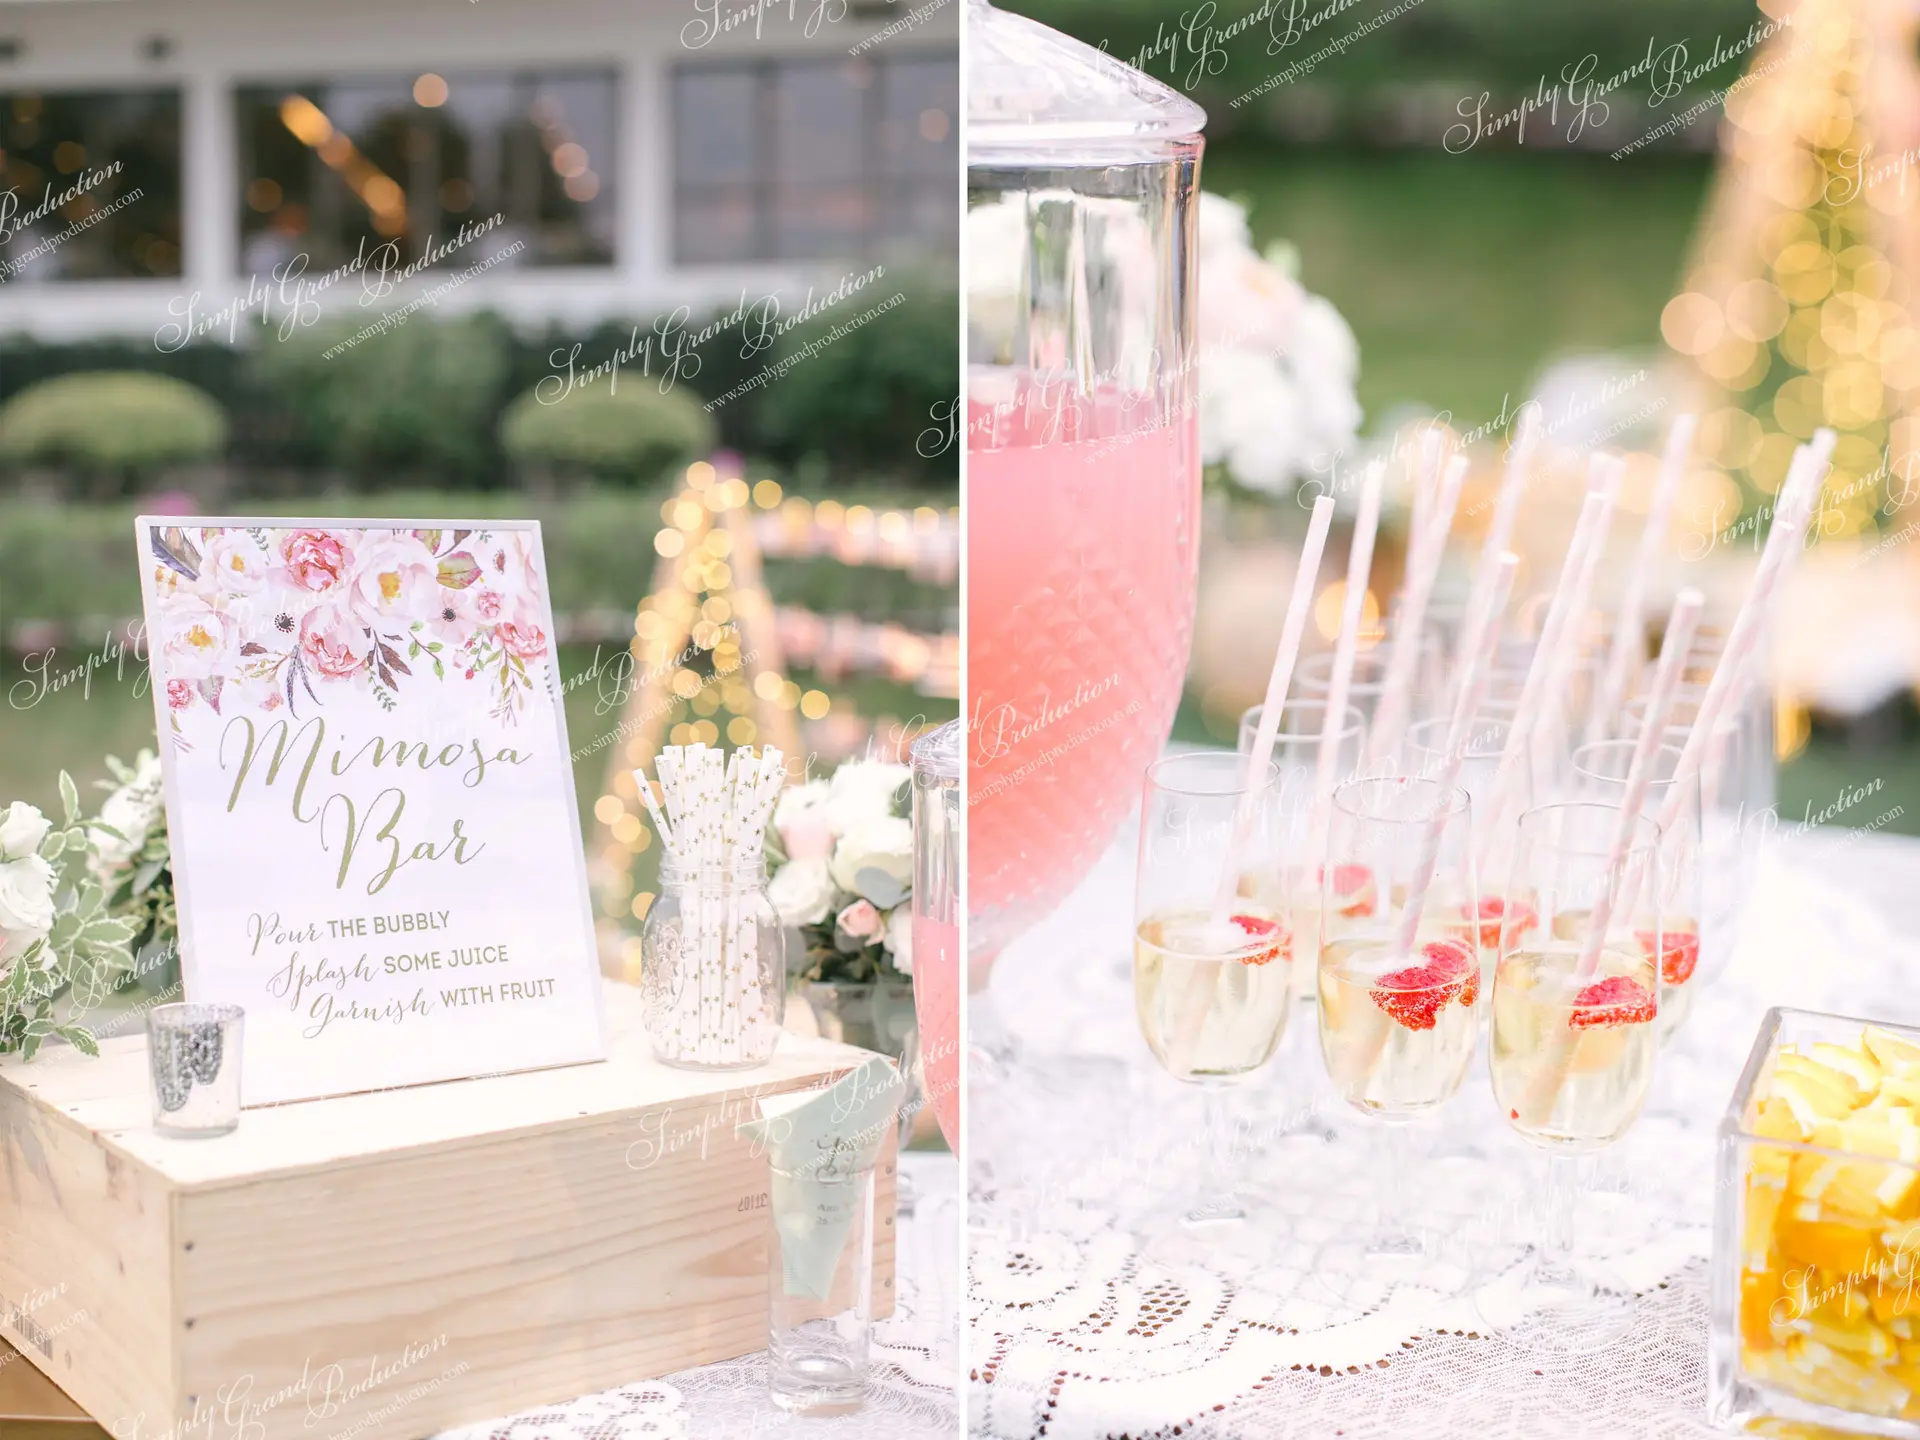 Simply_Grand_Production_Outdoor_wedding_decoration_drinks_party_Beas_River_1_7.jpg